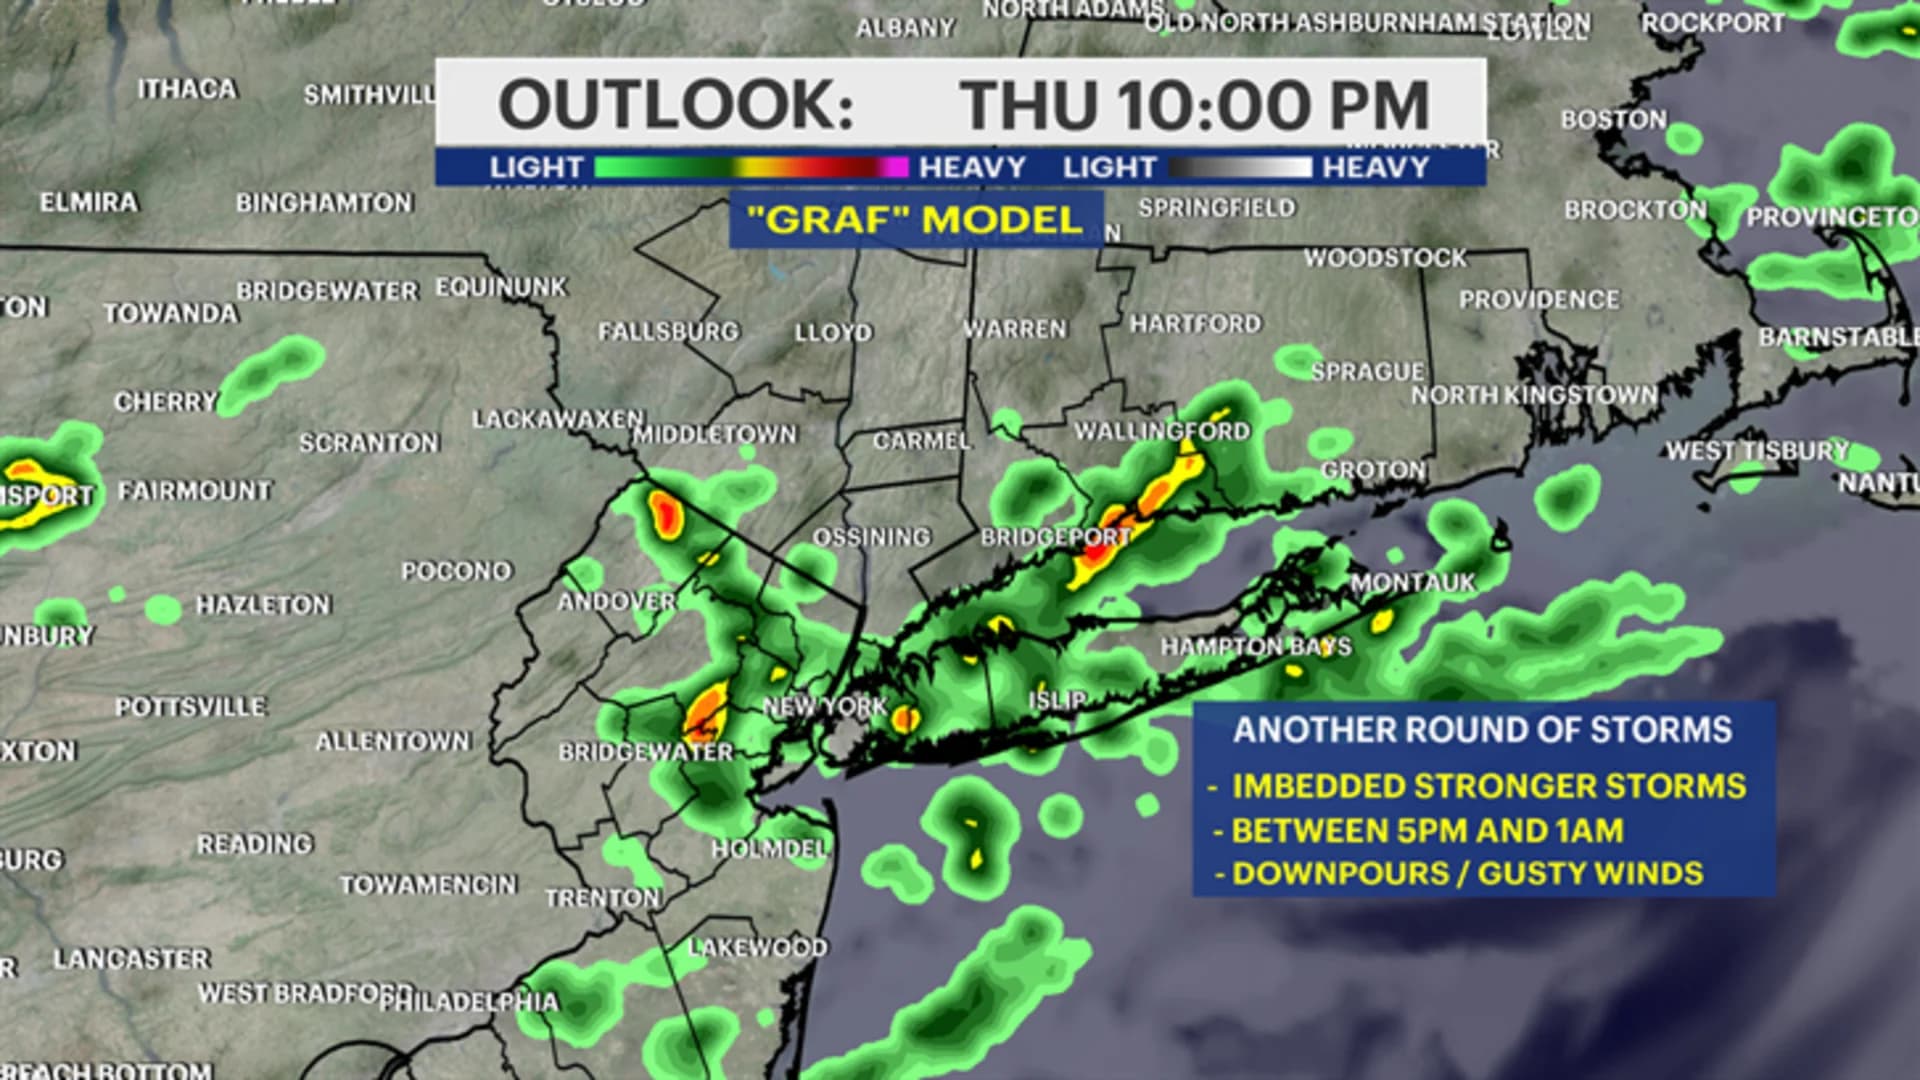 Evening storms bring threat of downpours, flash flooding